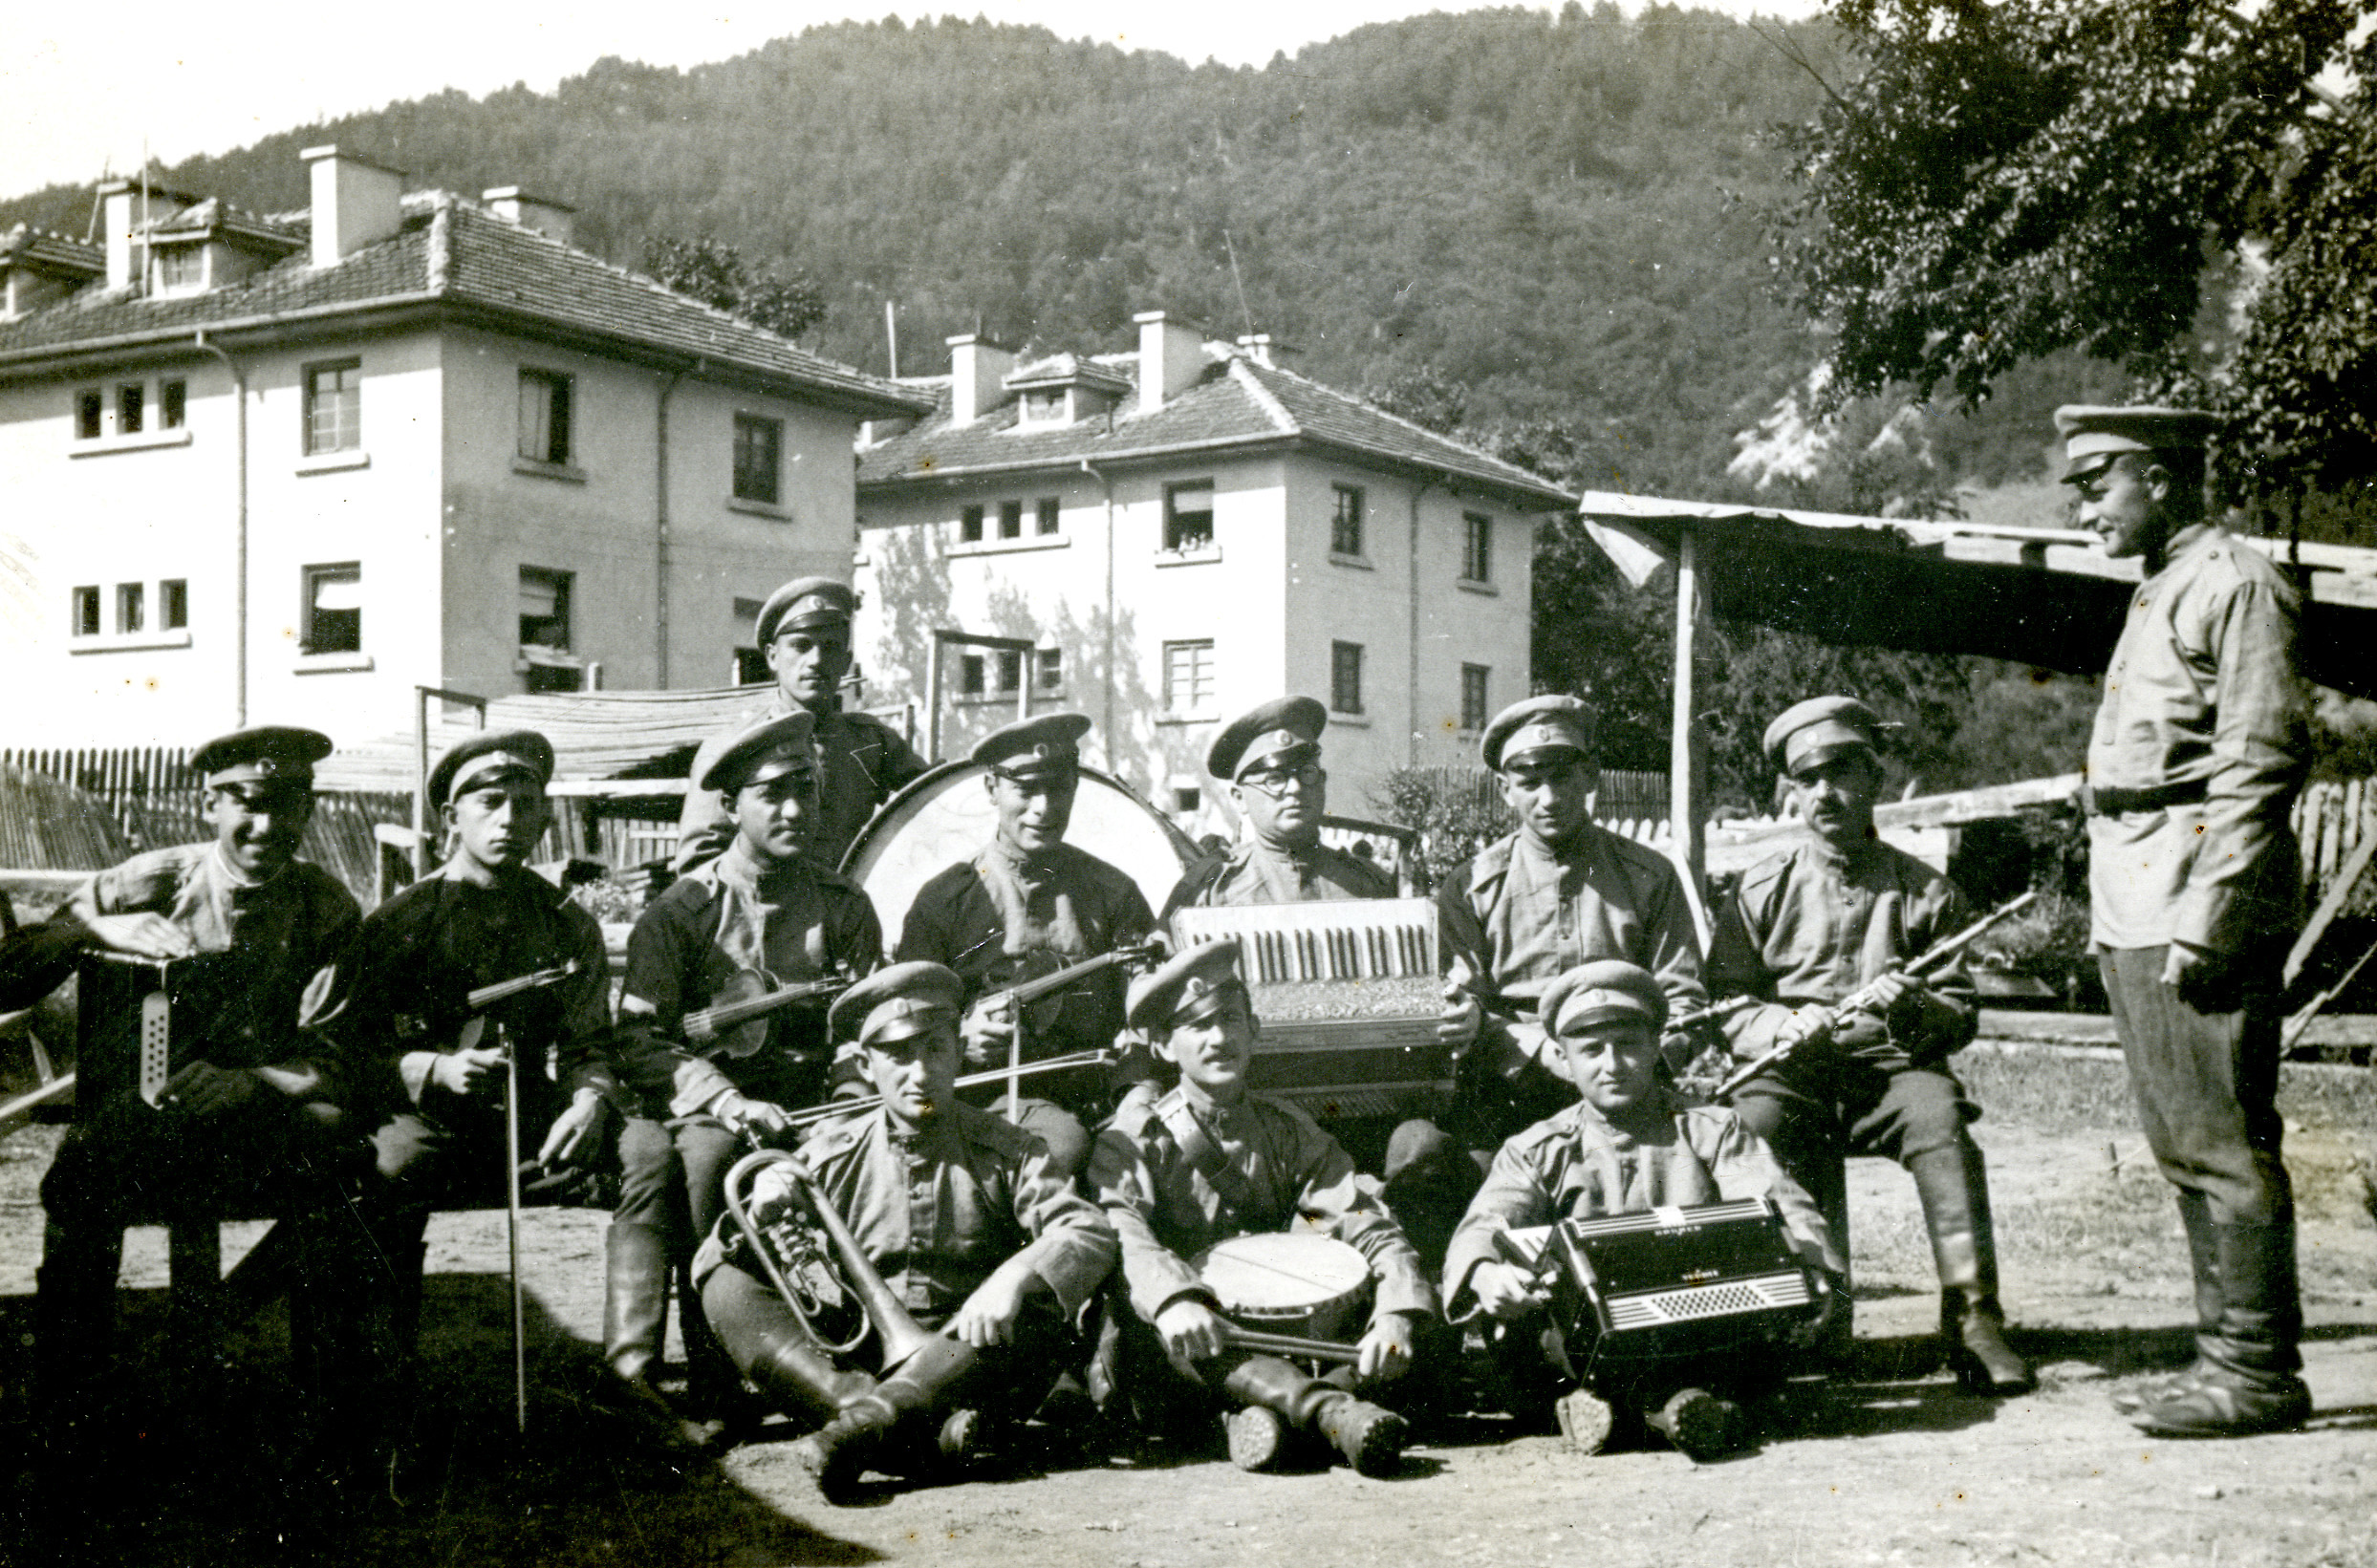 Group portrait of Bulgarian musicians in an unidentified location.  

Among those pictured is Nissim Alkalay (seated in the second row, third from the left).